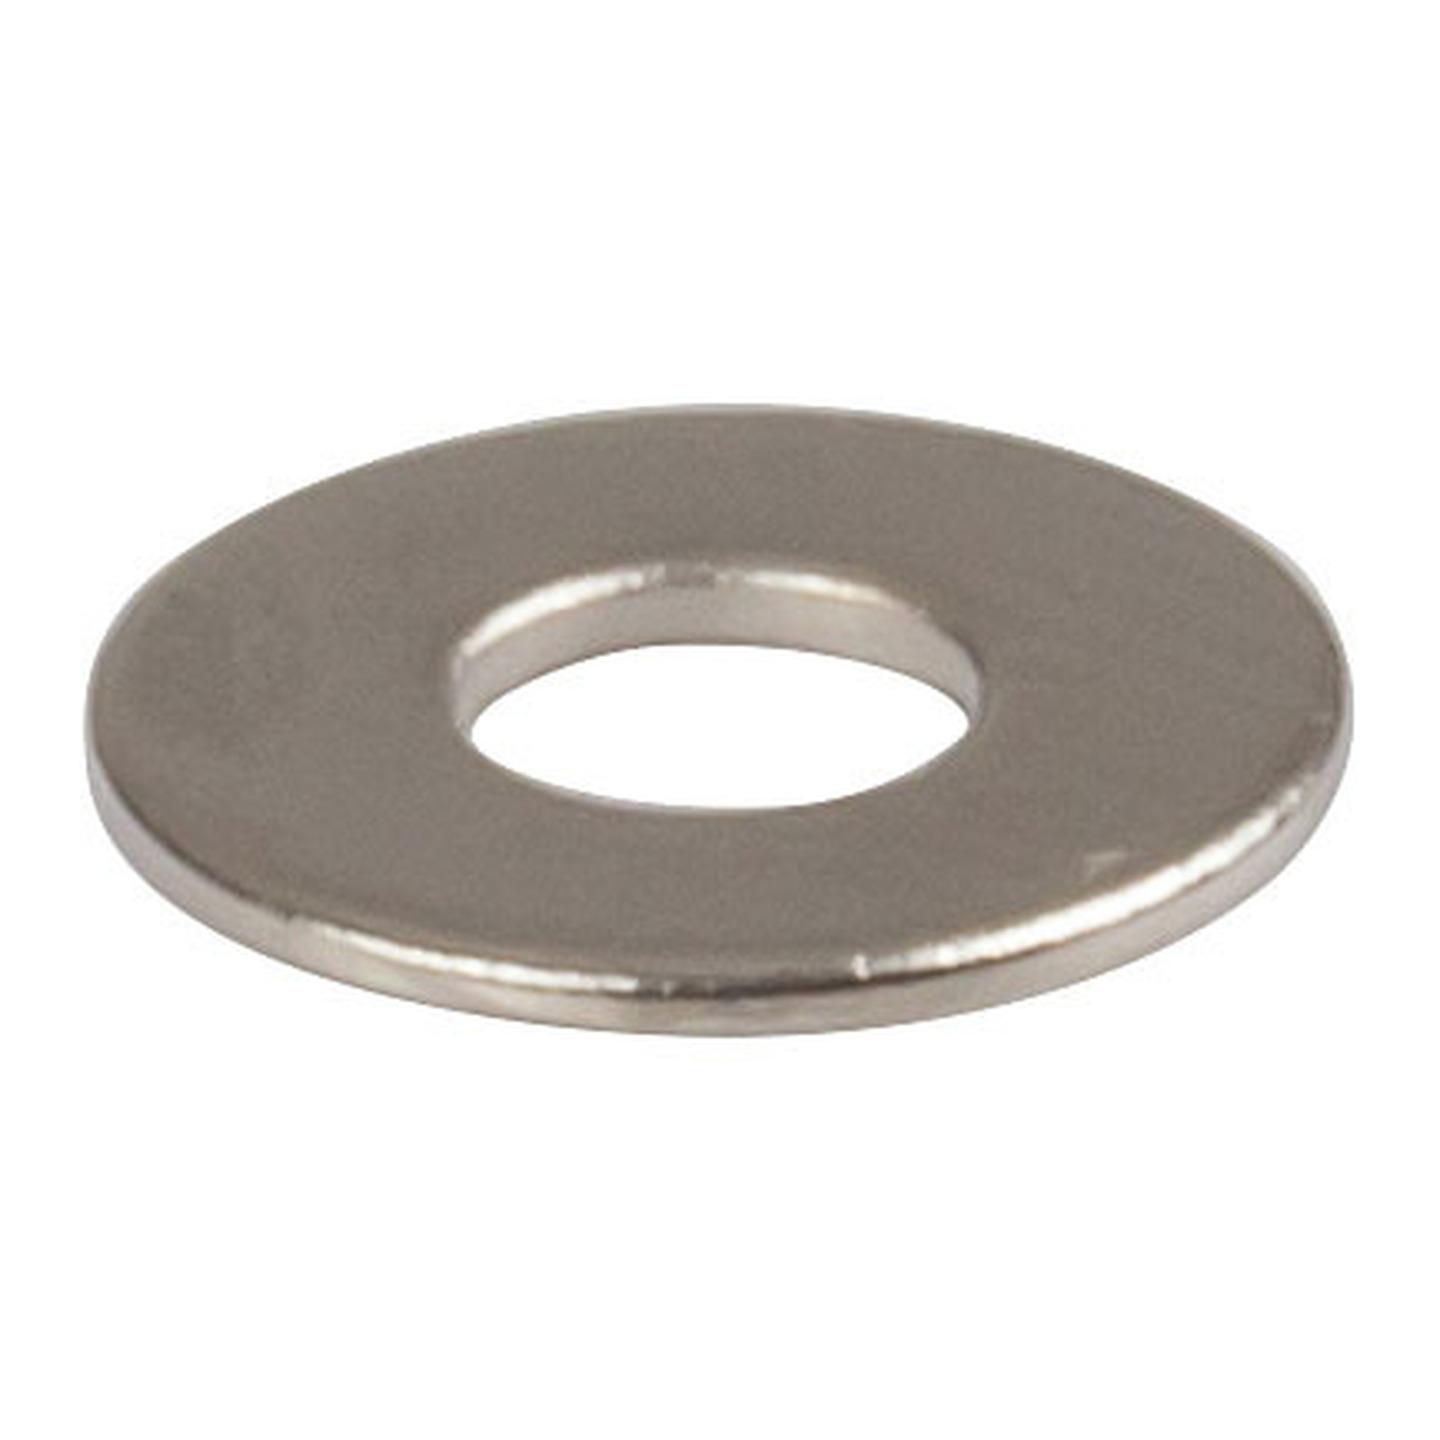 3mm Flat Steel Washers - Pack of 25